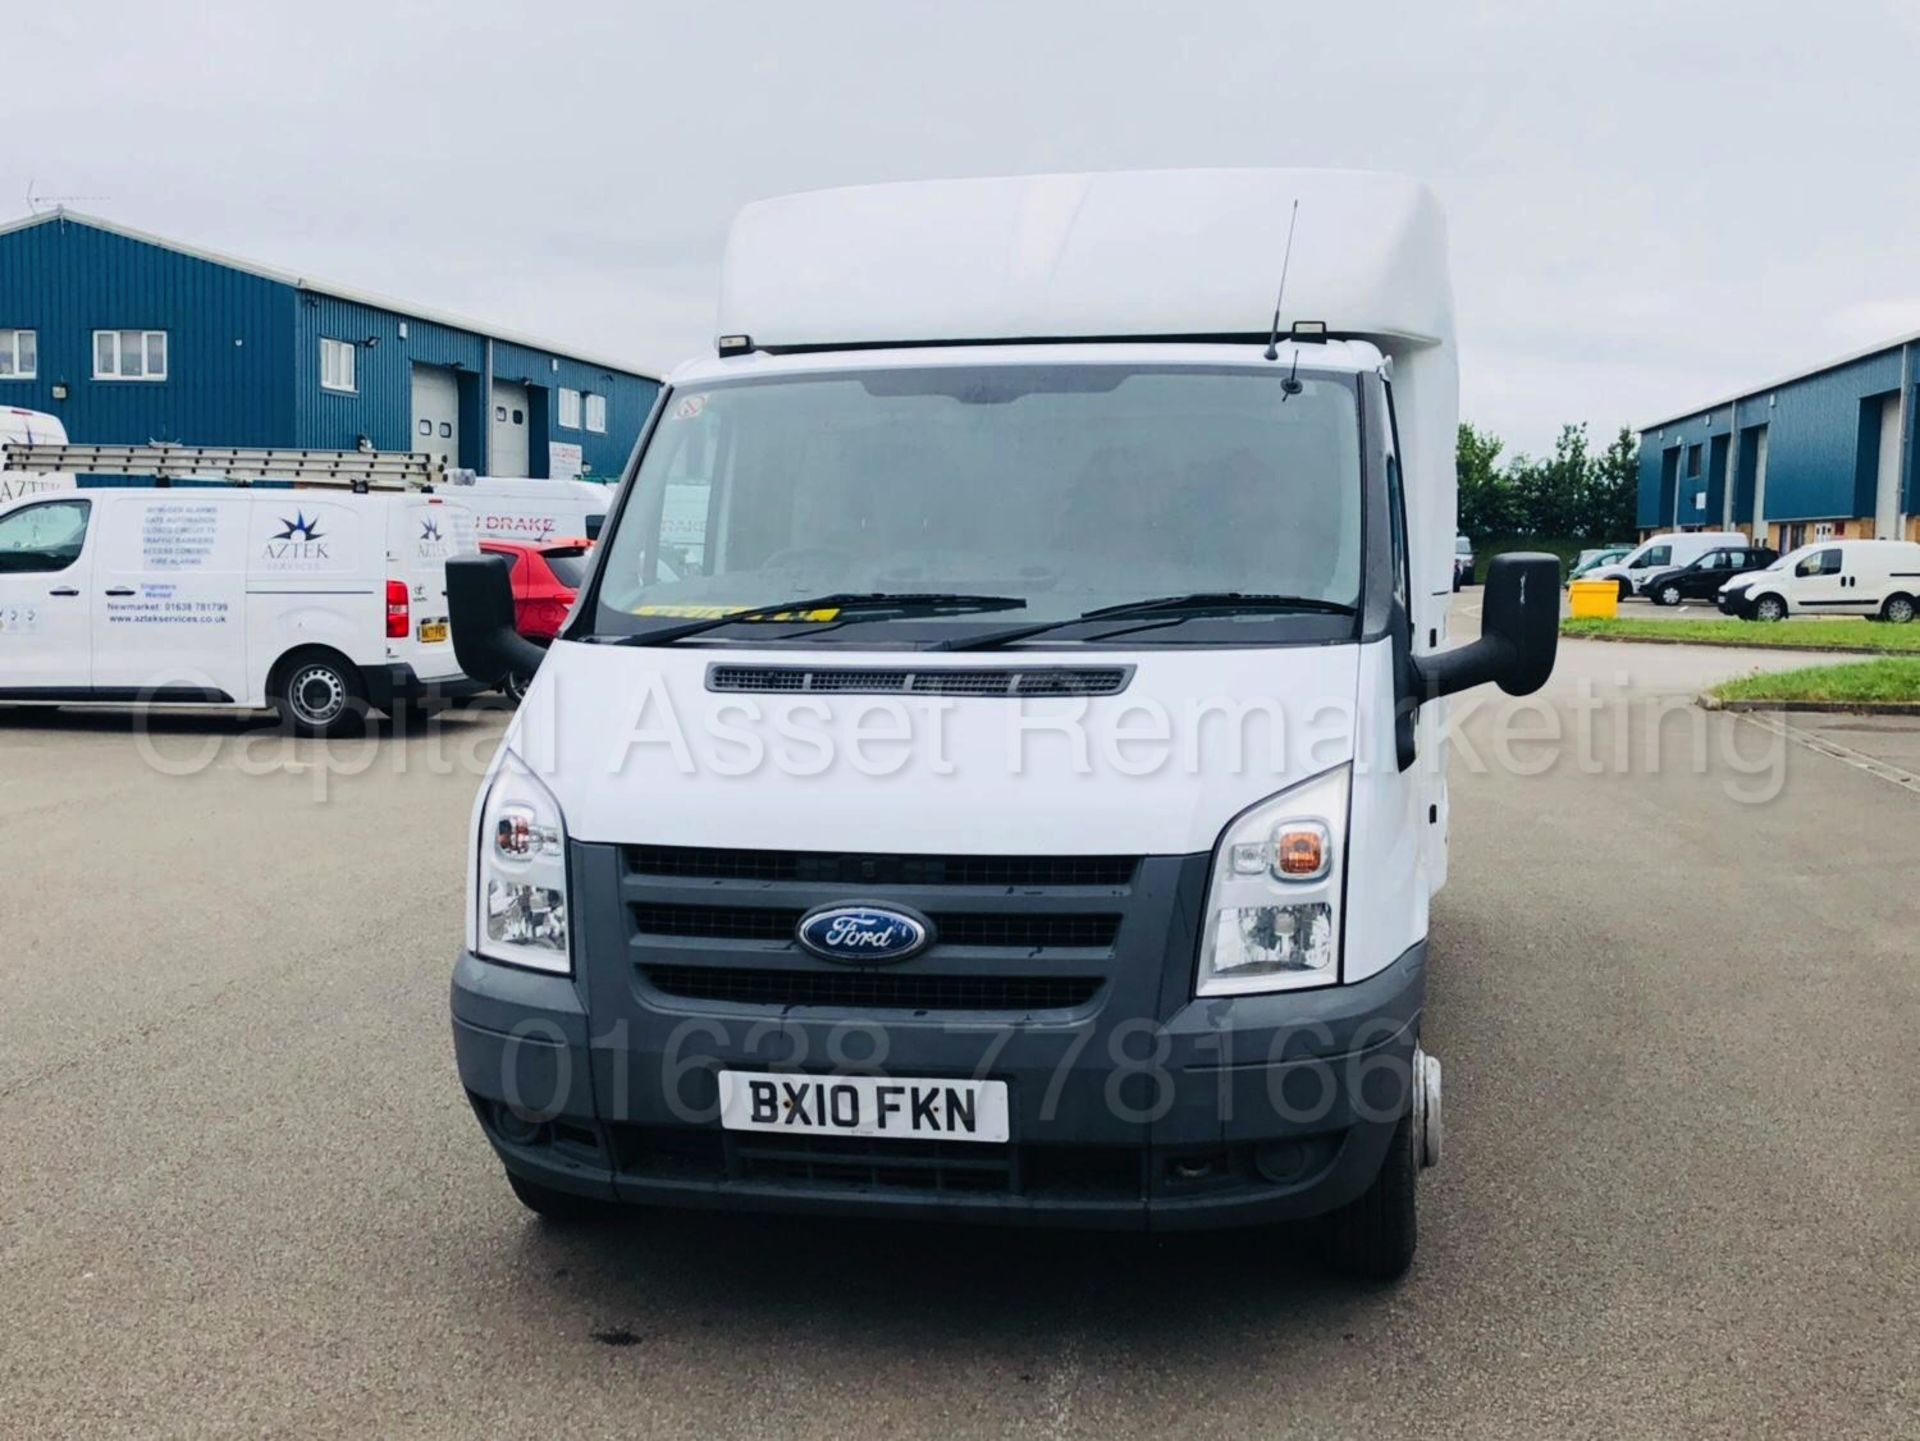 (On Sale) FORD TRANSIT 100 350 'BOX / LUTON VAN' (2010) '2.4 TDCI - 100 BHP' (1 COMPANY OWNER) - Image 23 of 29